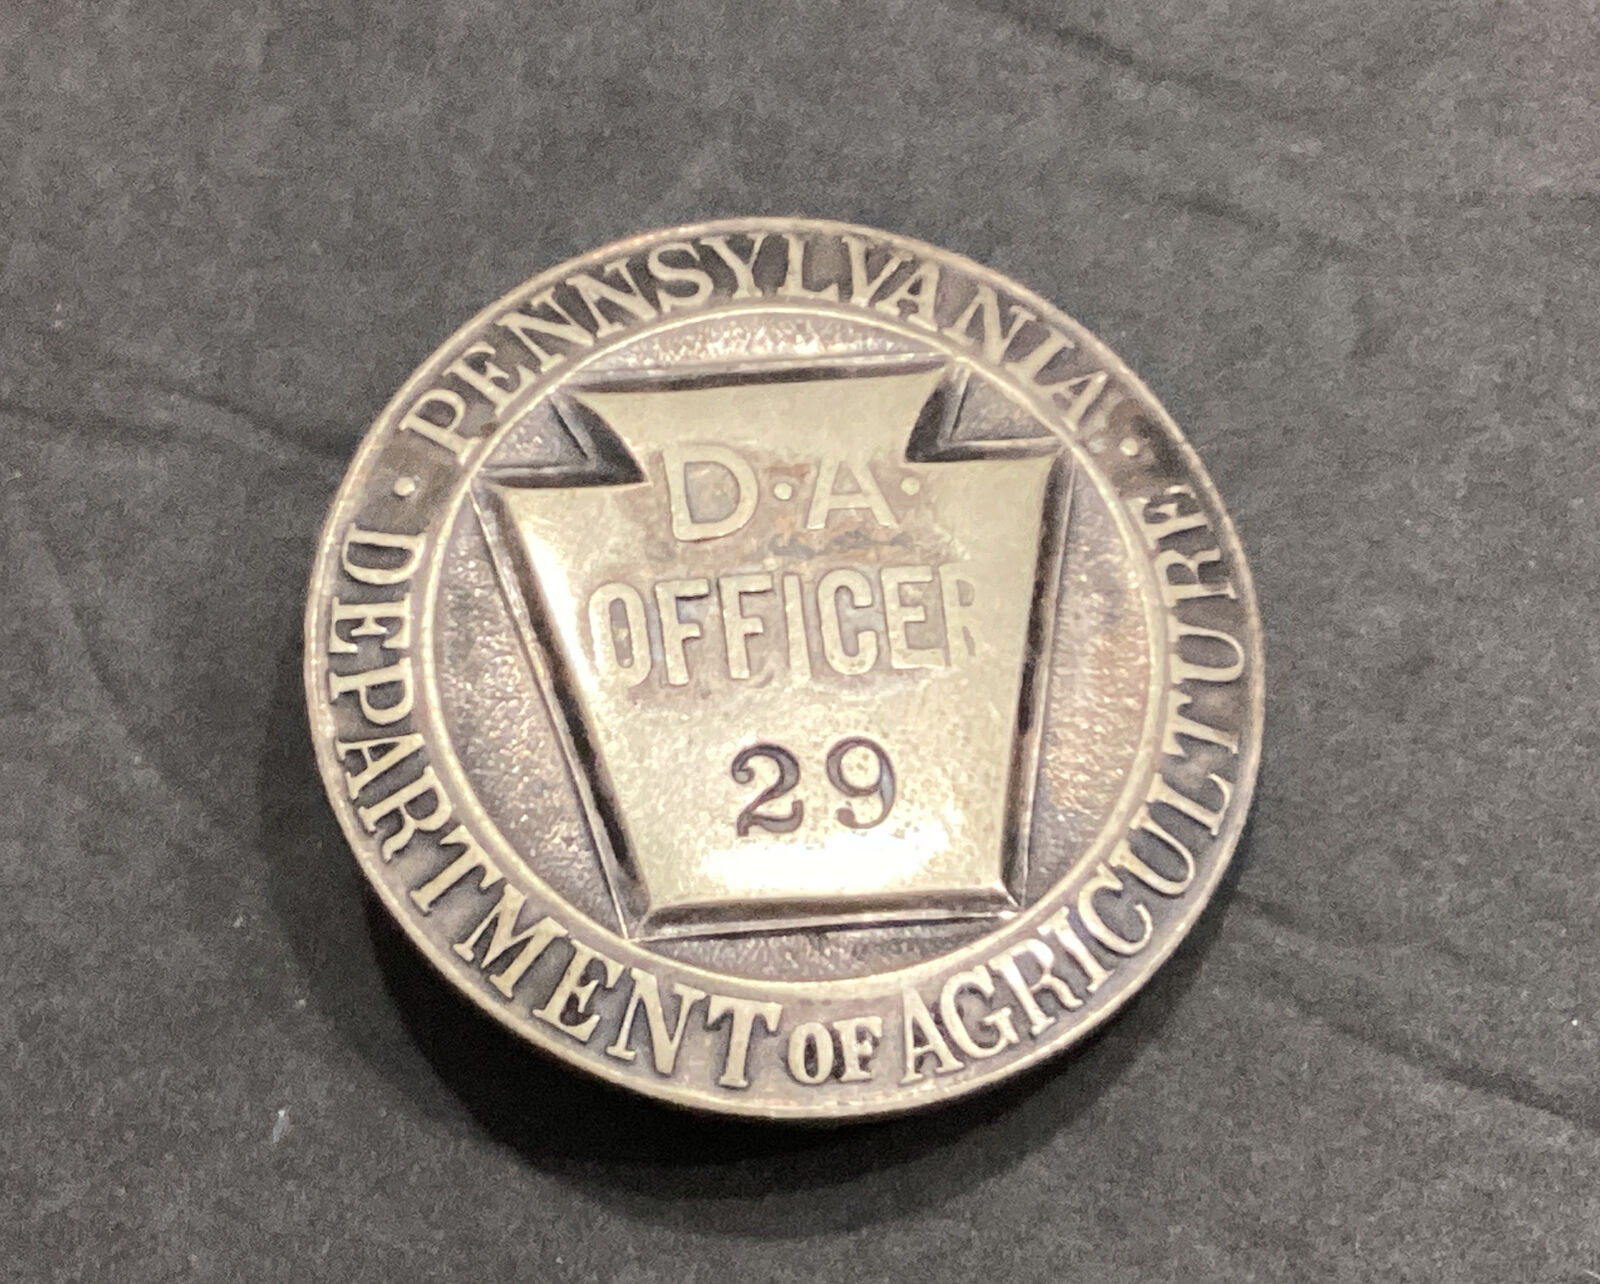 OBSOLETE 1930s Pennsylvania PA Department of Agriculture D.A. Officer Badge #29